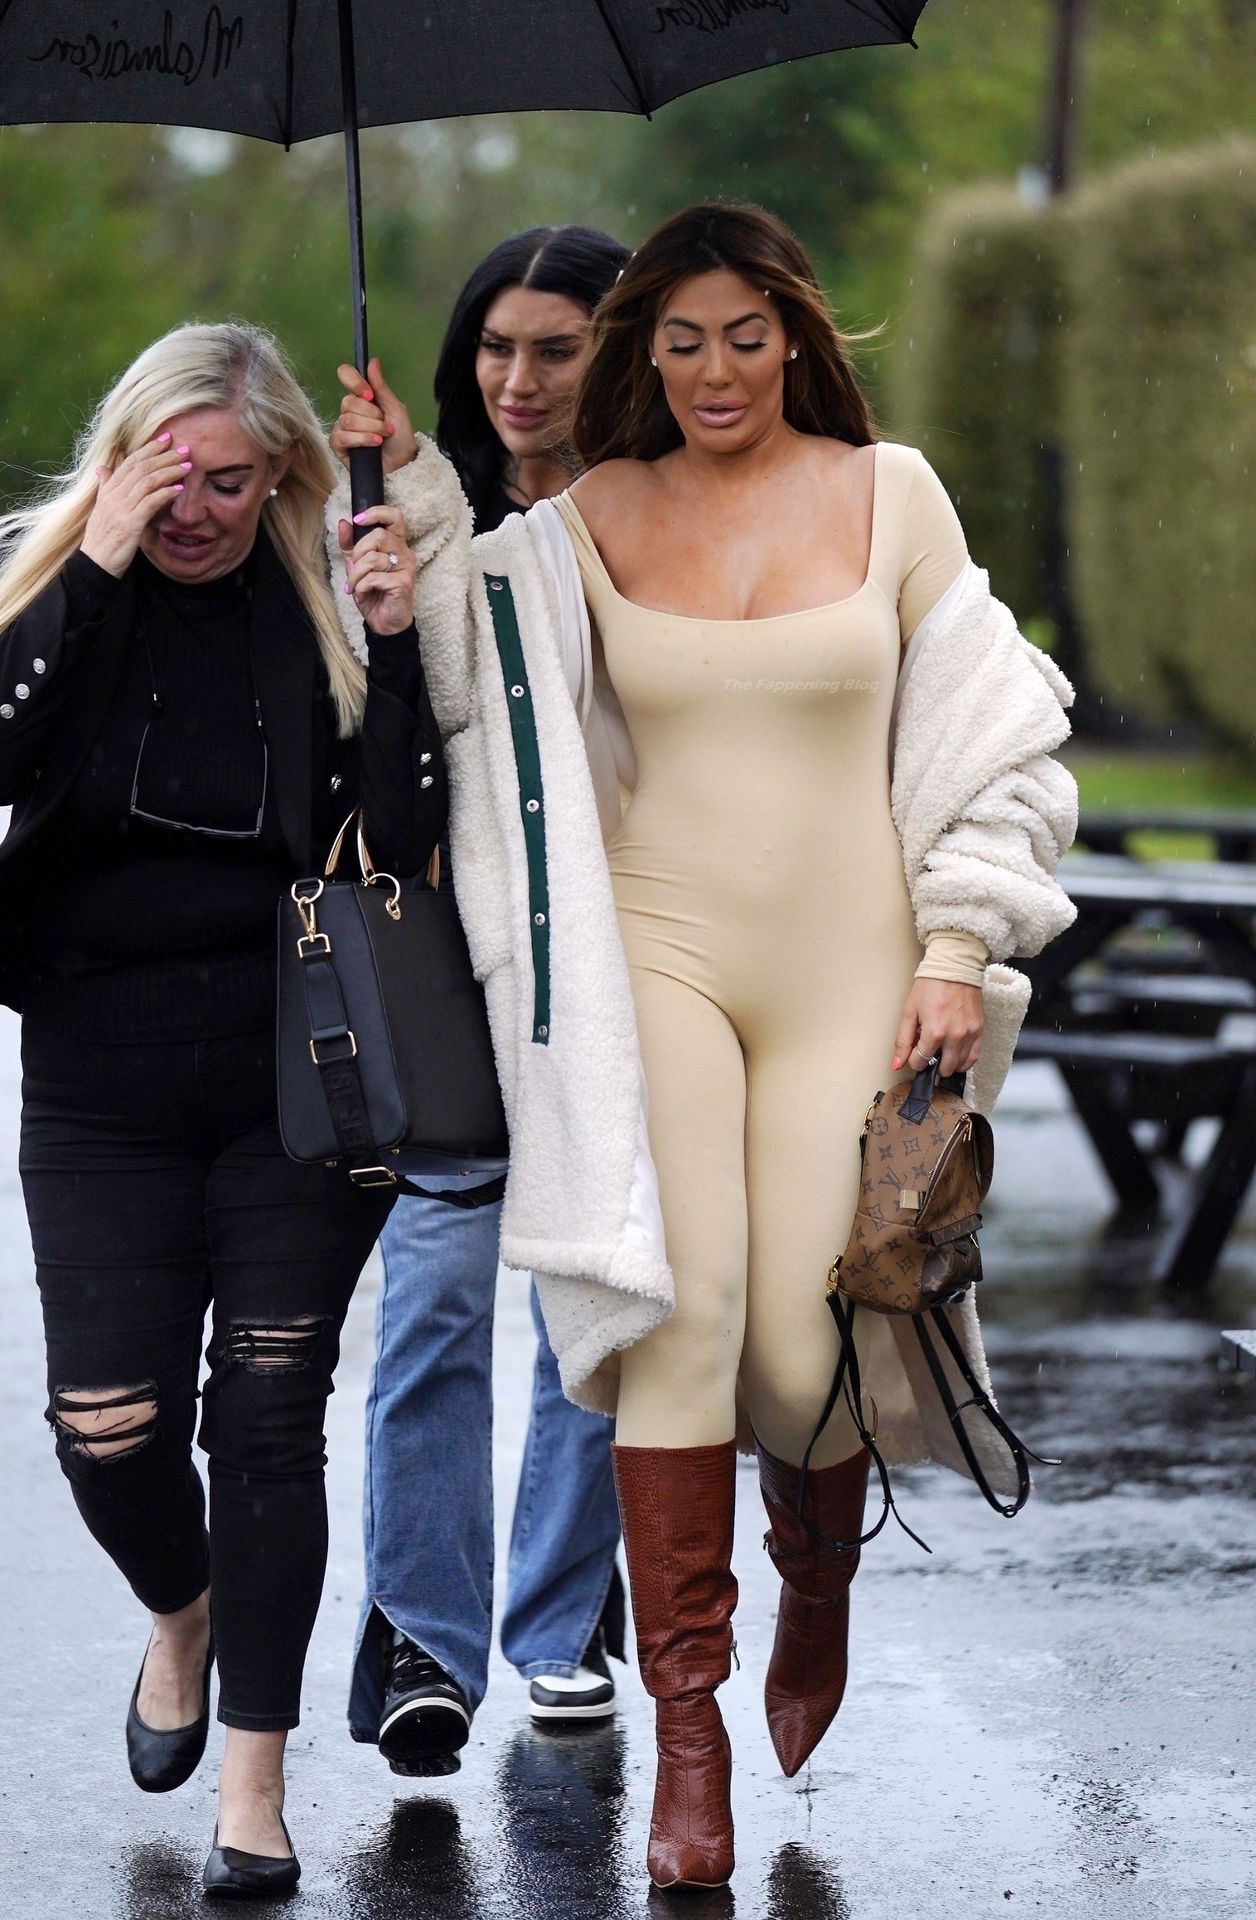 Chloe Ferry spills out of Nude Body Suit on a night out to Tomahawk Steakho...